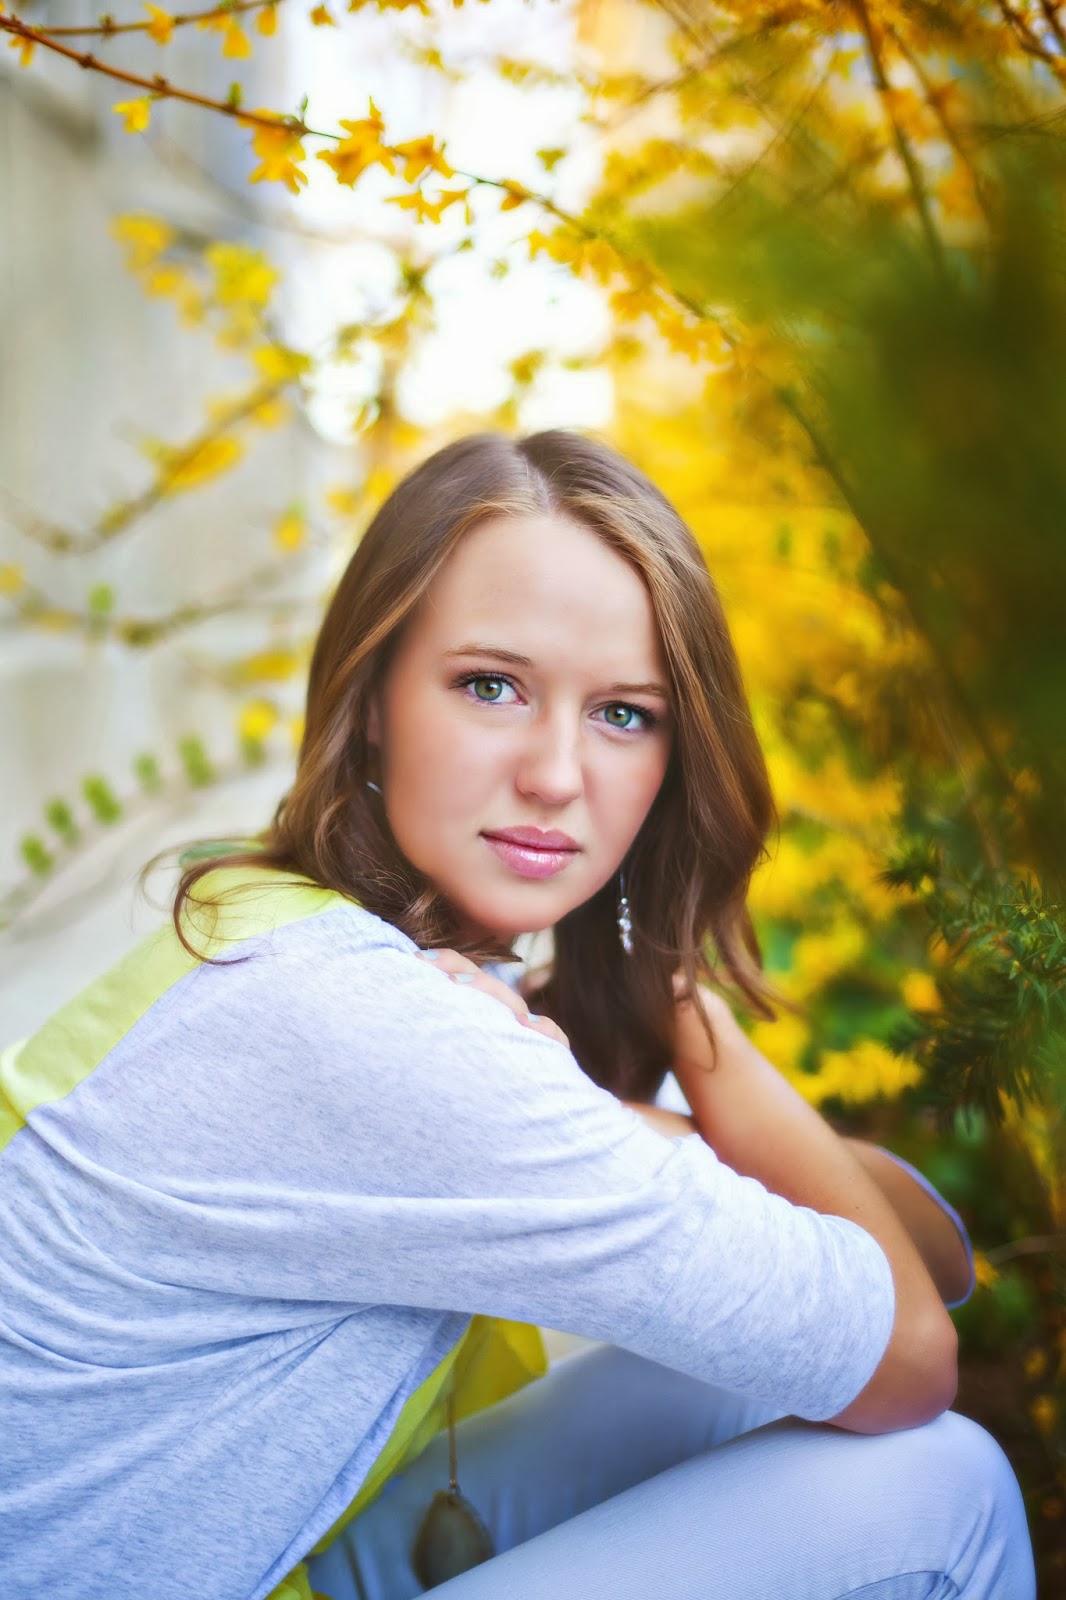 brookepehrsonphotography: Seniors Part 1 from 2013